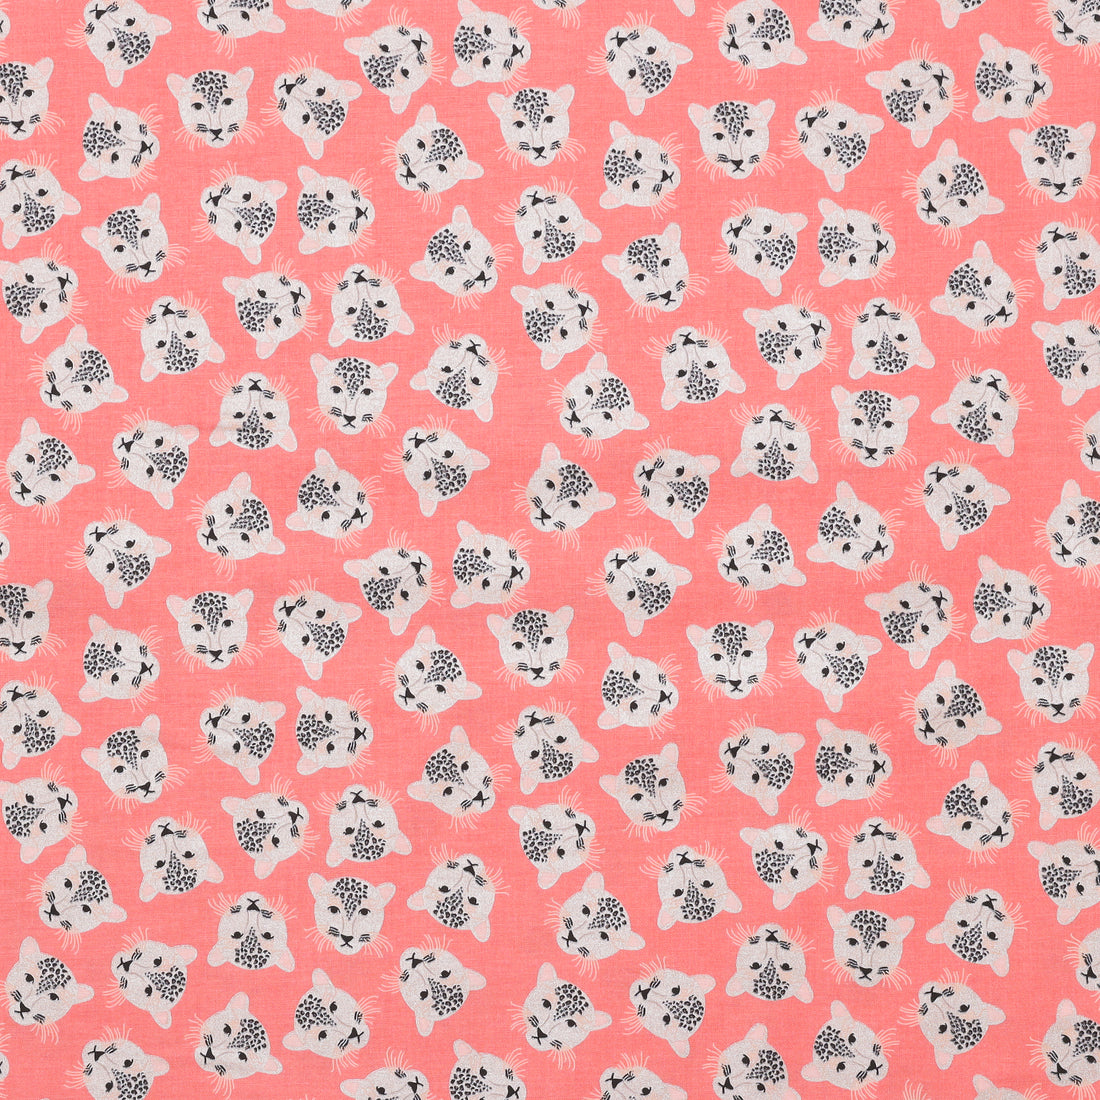 Cotton - Spotted - Sparkle - Rose